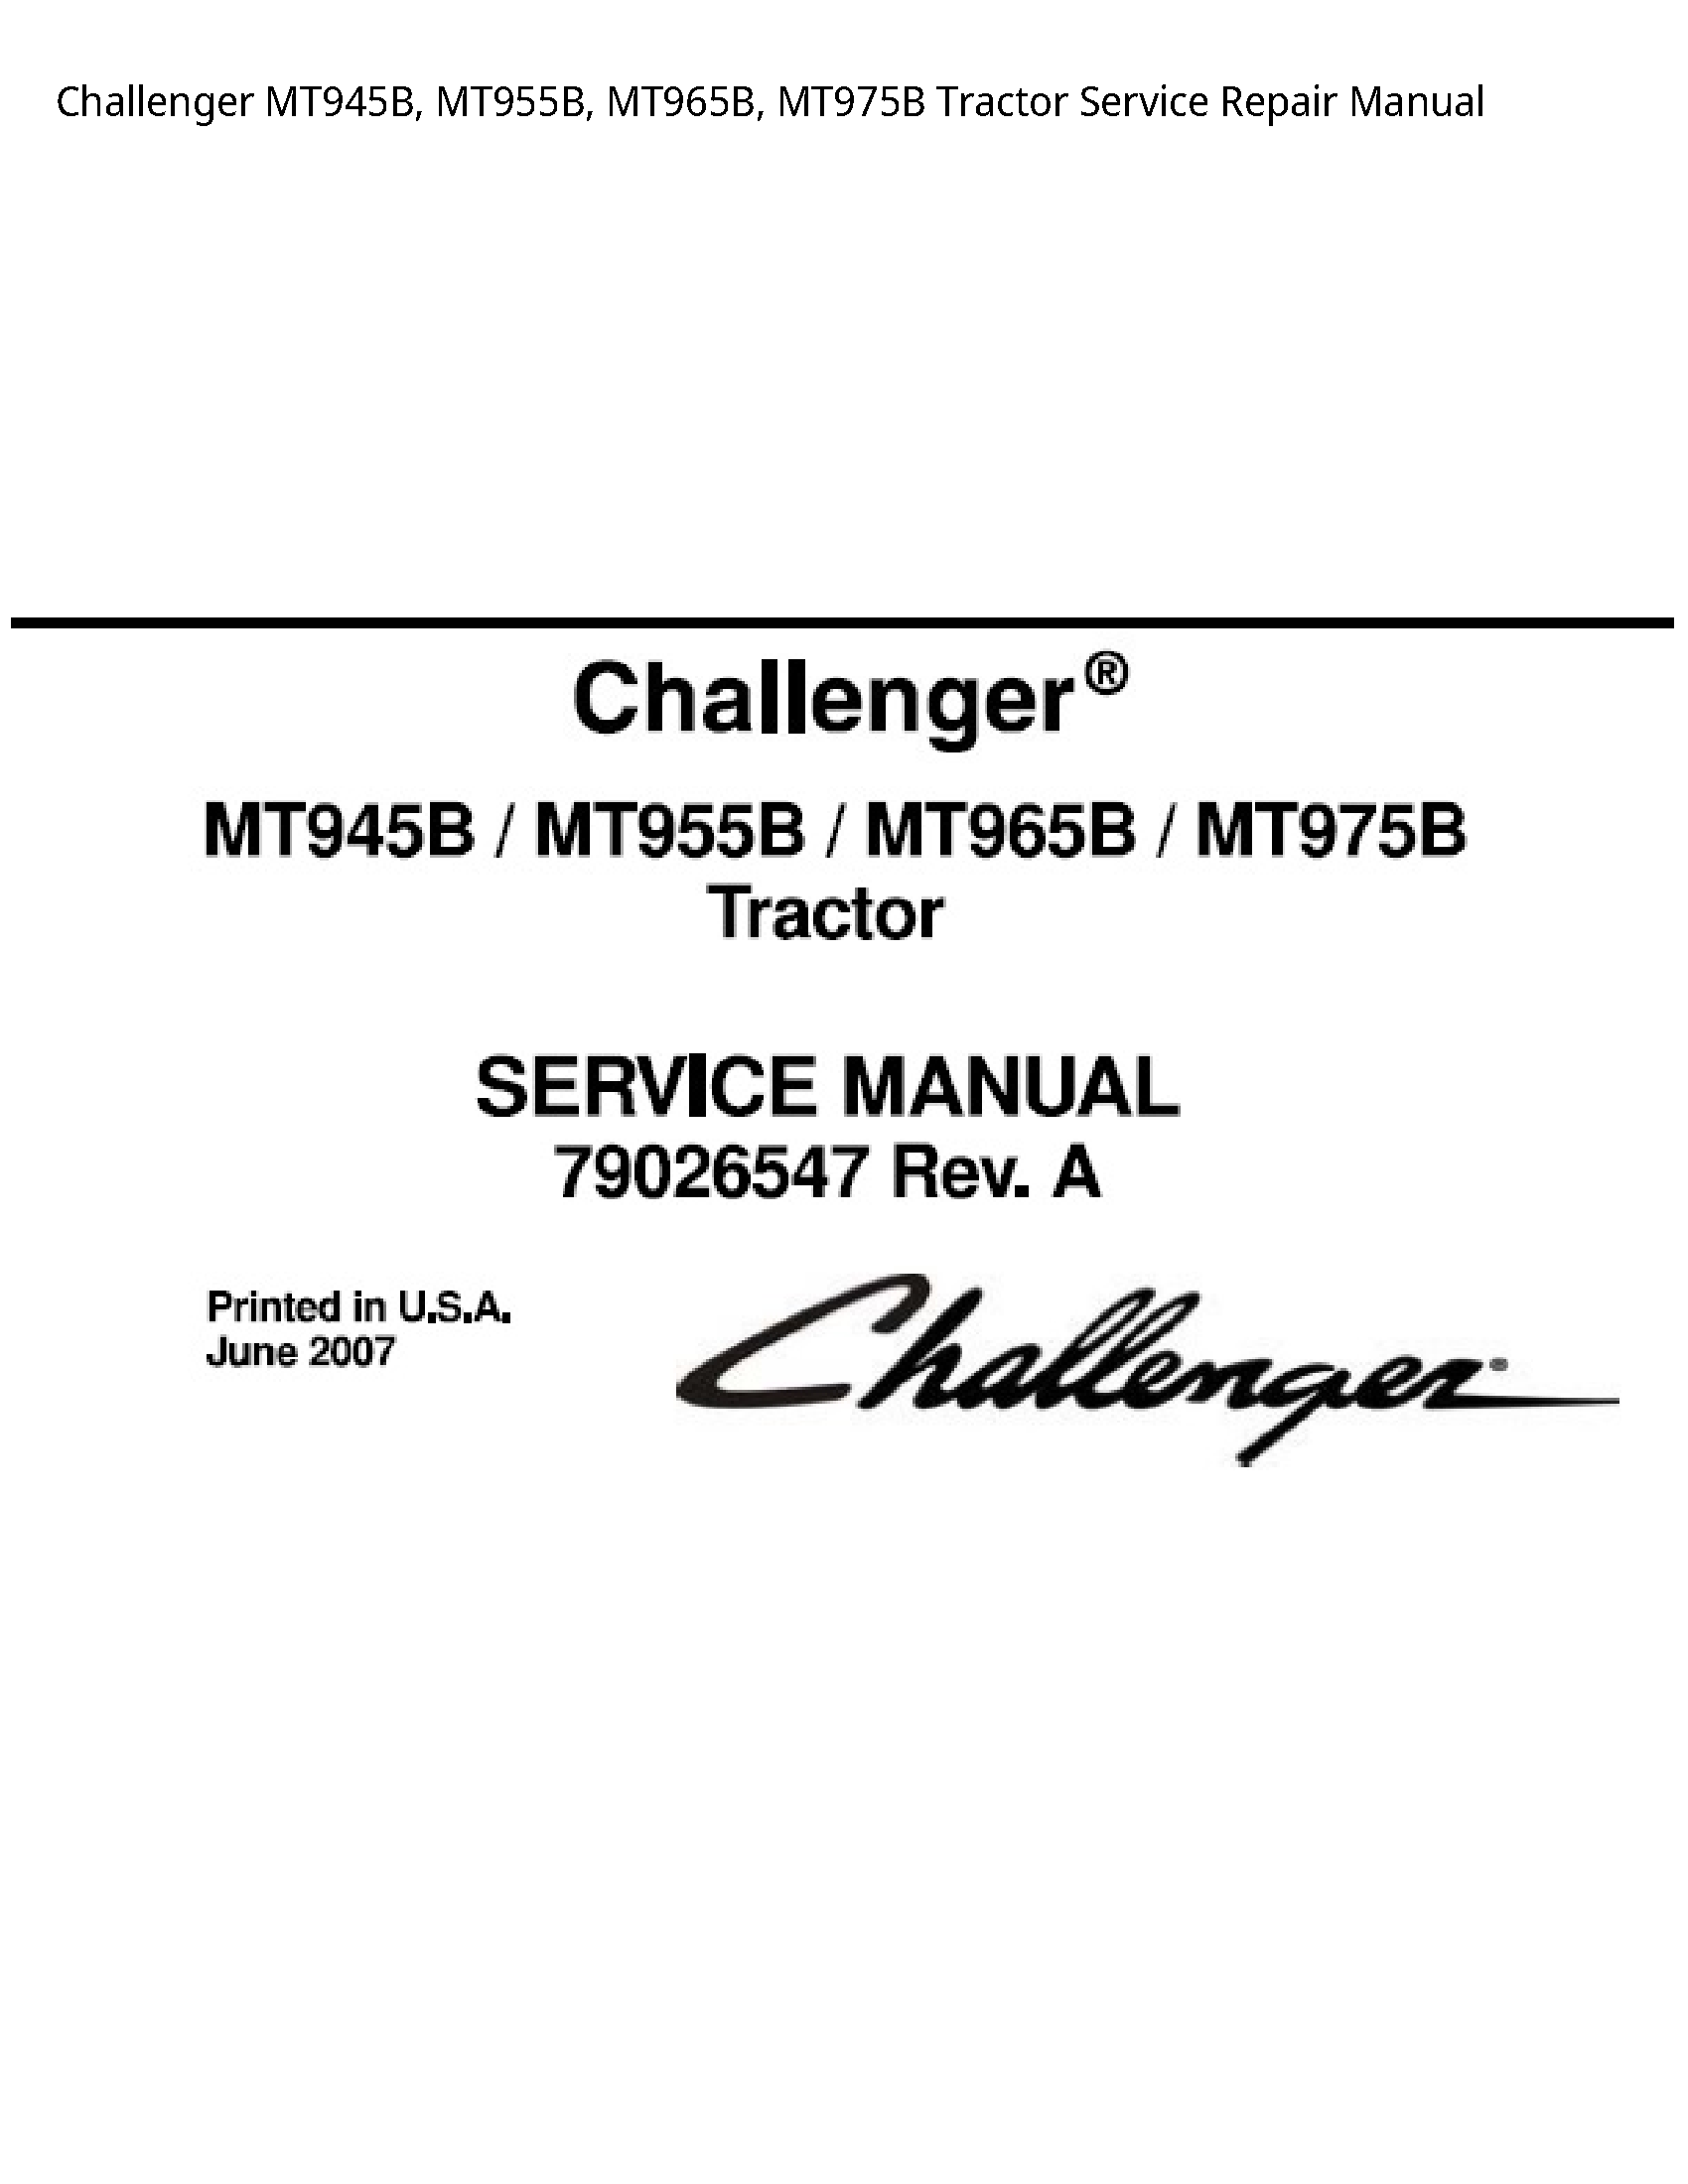 Challenger MT945B Tractor manual